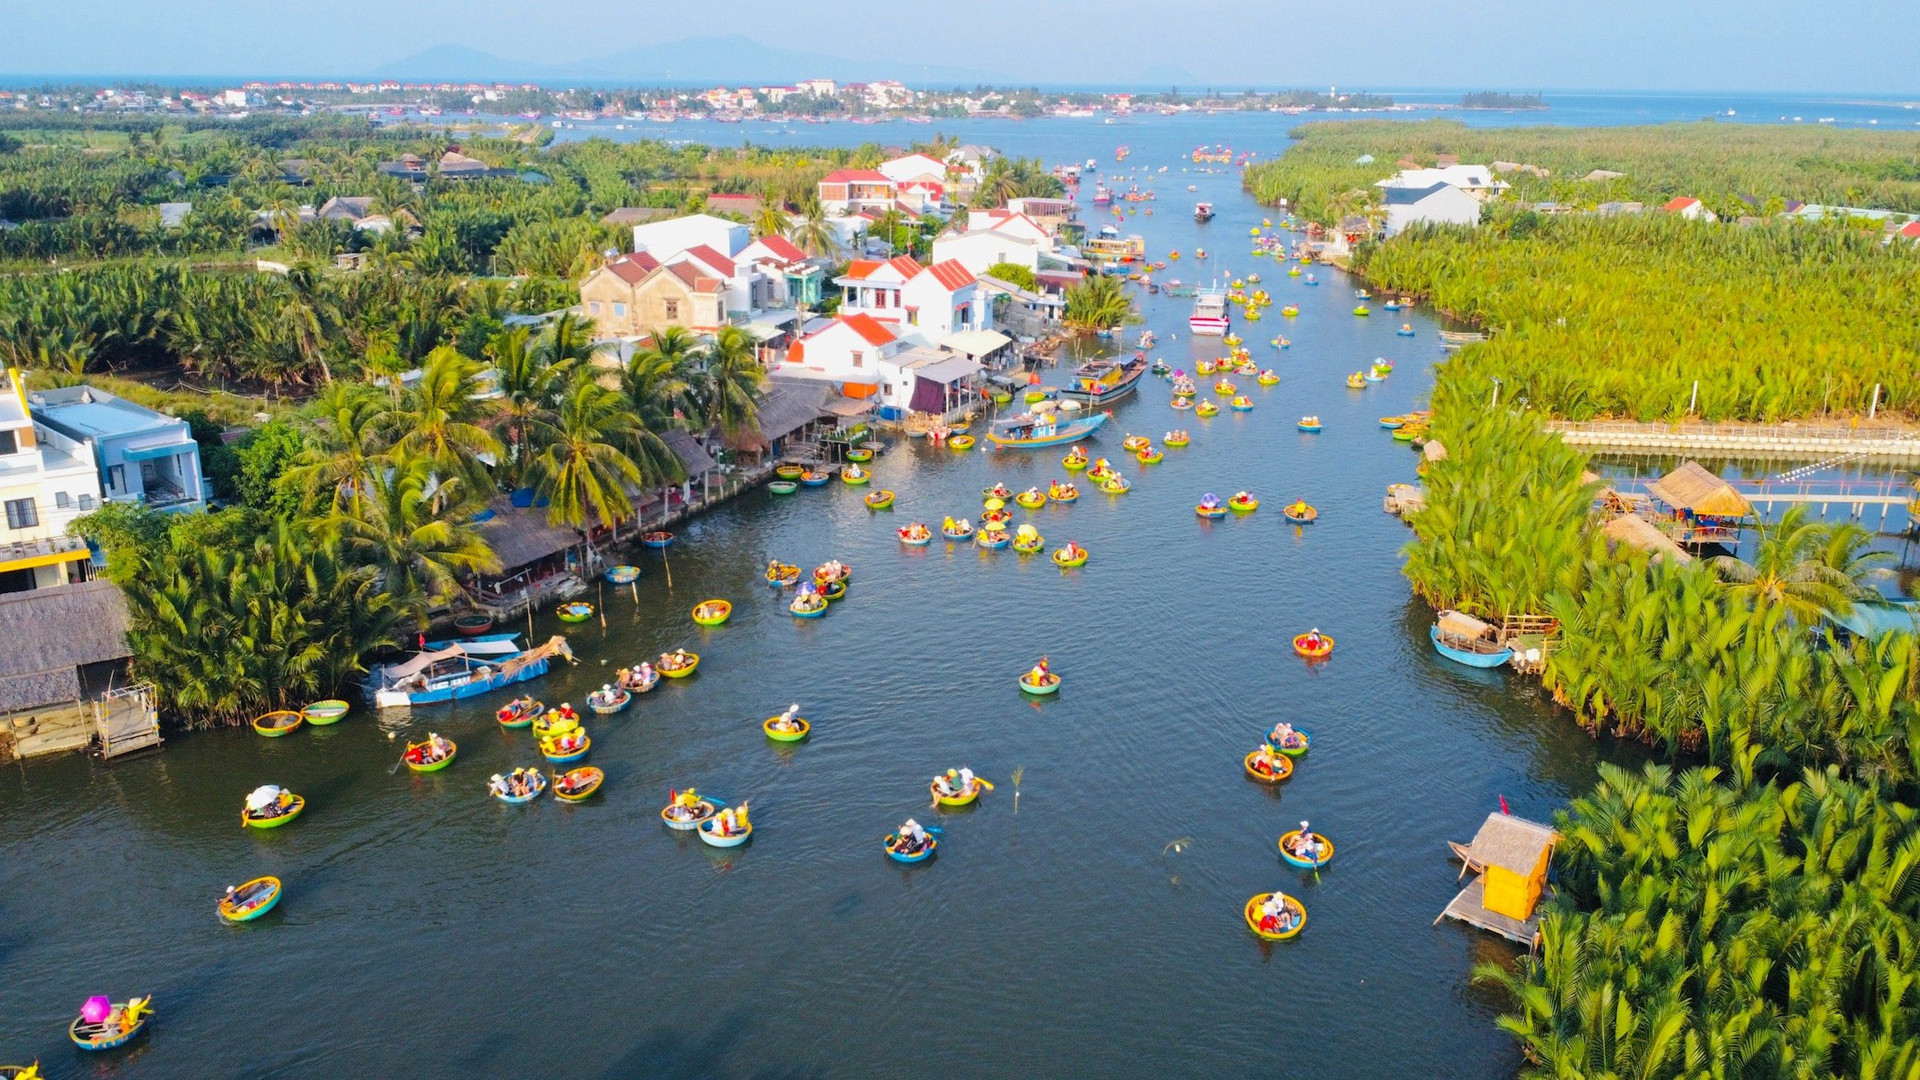 Hoi An among 9 most scenic places to visit in Vietnam